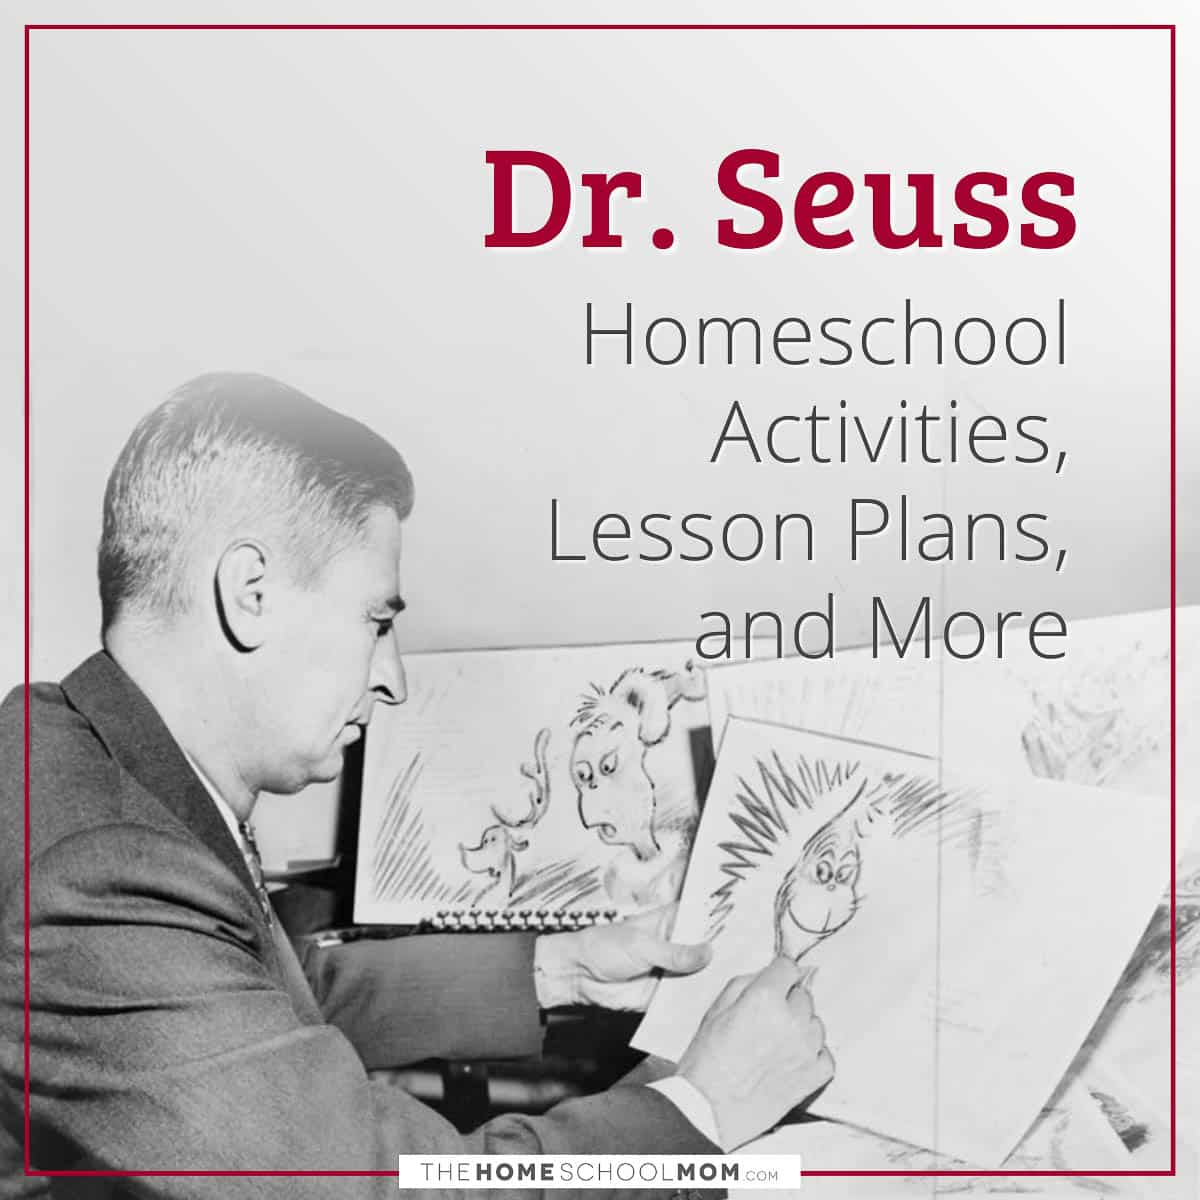 Dr. Seuss Homeschool Activities, Lesson Plans, and More.